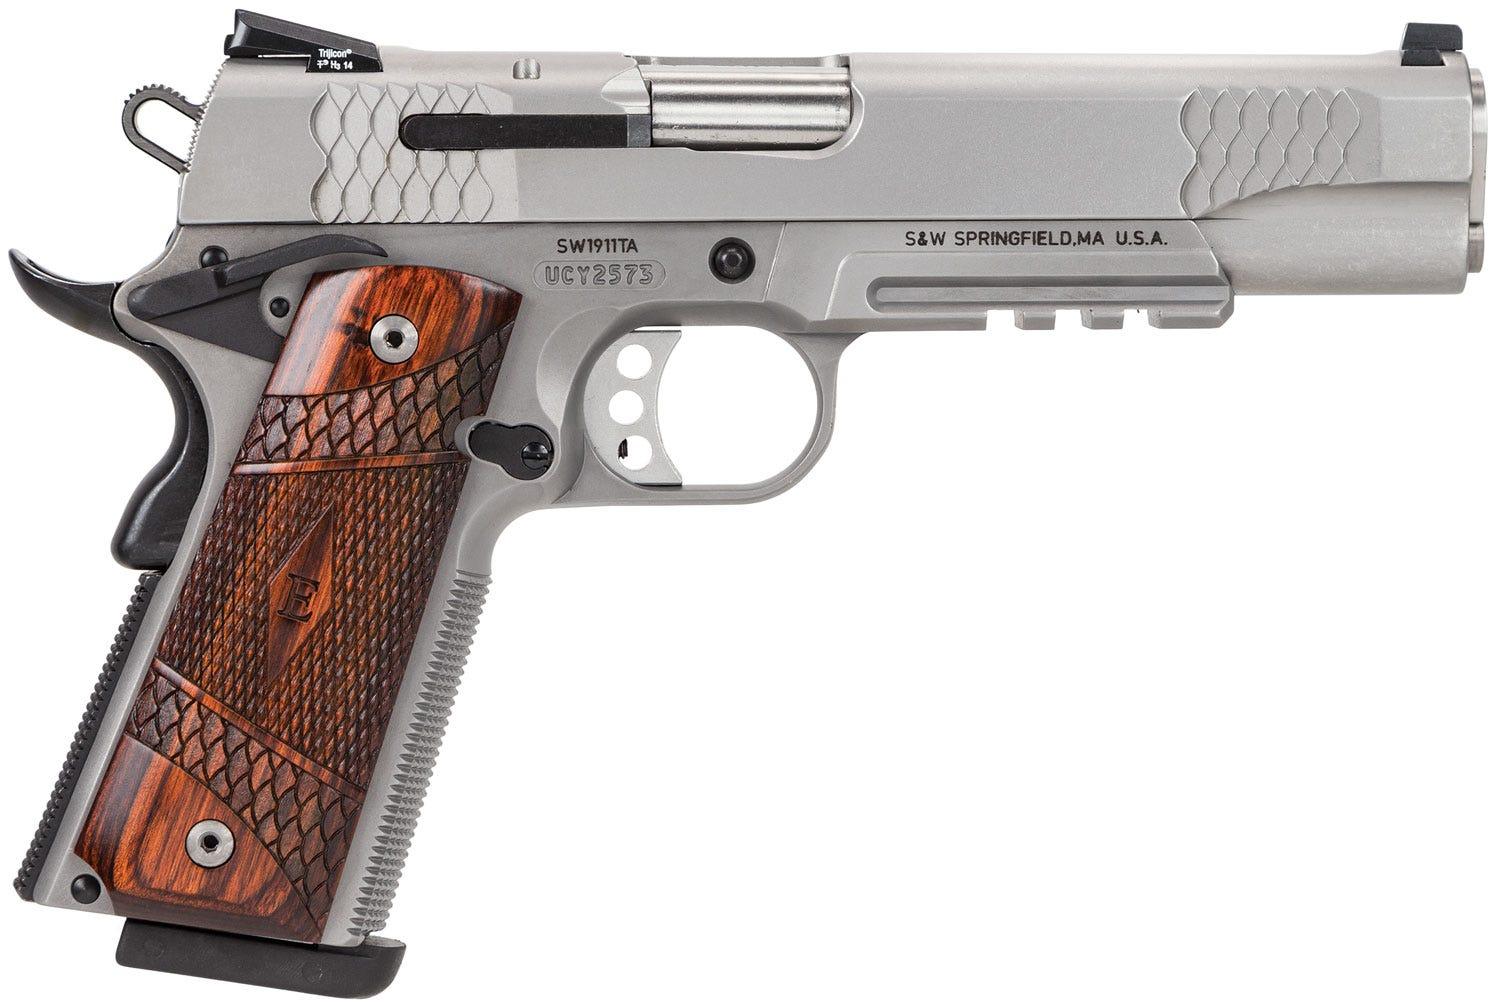 Smith & Wesson 1911 E-Series 45 ACP 5" 8 Round Stainless Steel Laminate Wood Grip with Rail Pistol - $1248.88